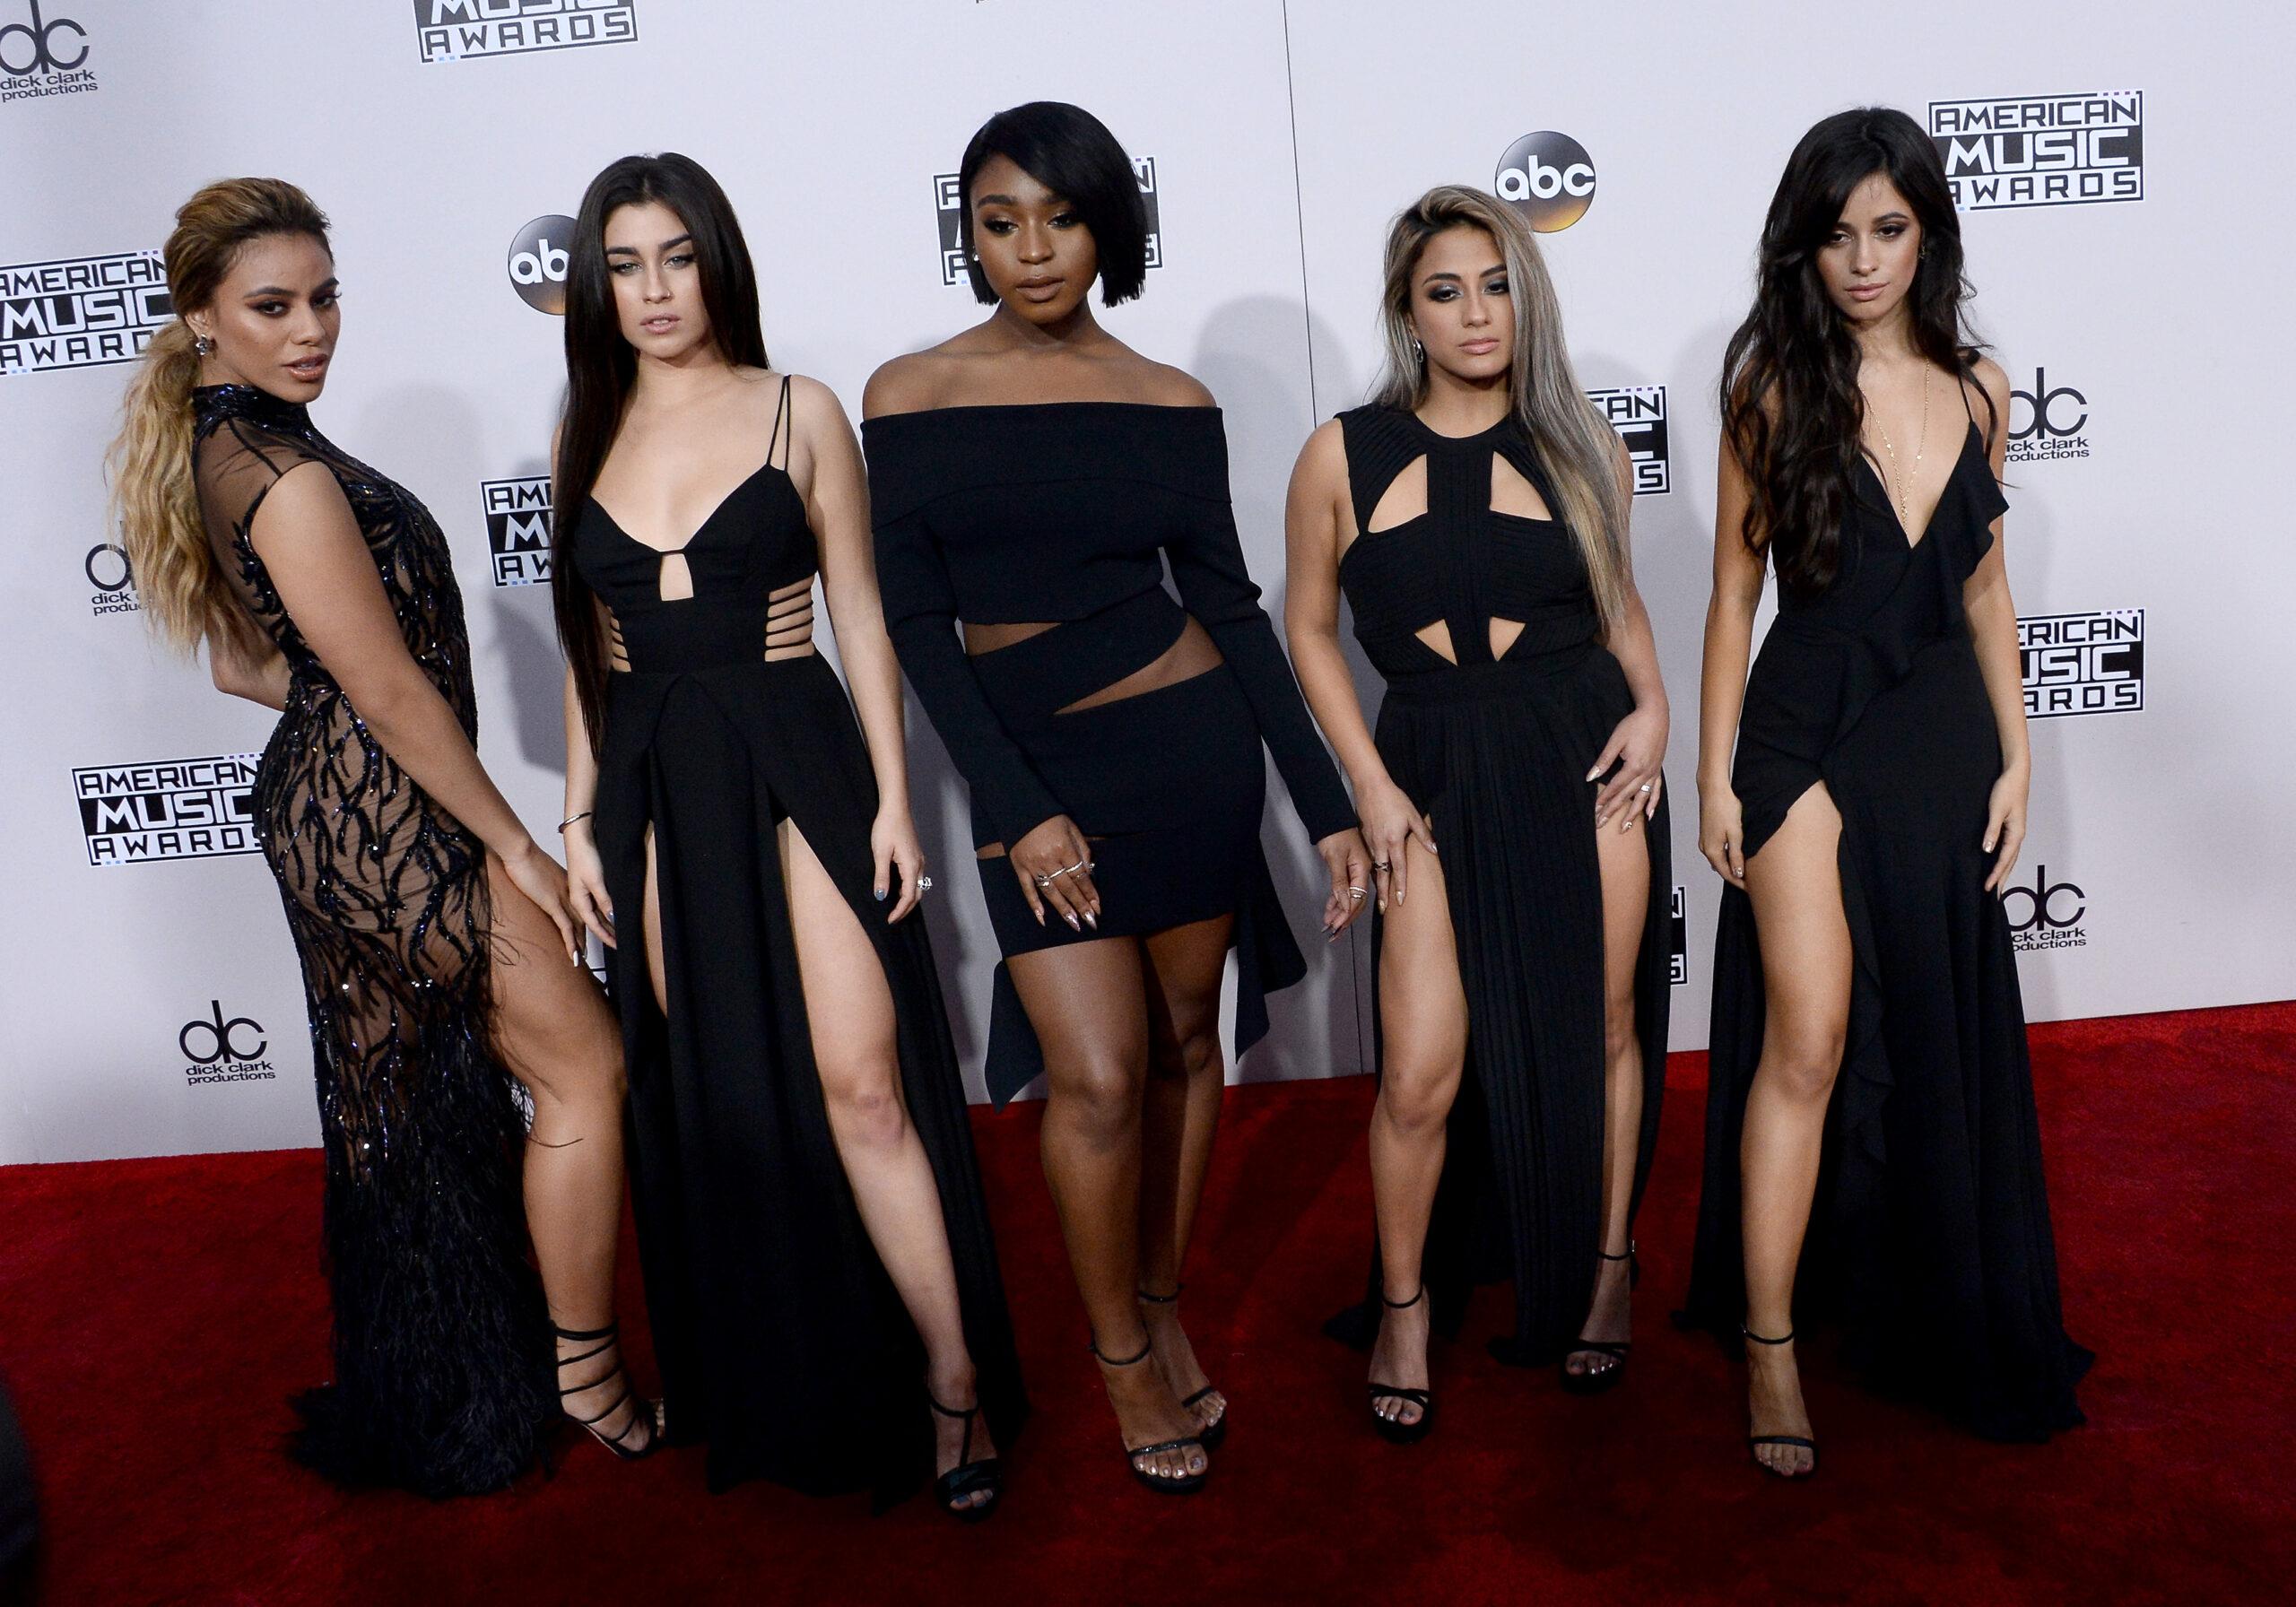 (L-R) Recording artists Dinah Jane Hansen, Lauren Jauregui, Normani Hamilton, Ally Brooke and Camila Cabello of musical group Fifth Harmony arrive for the 2016 American Music Awards held at Microsoft Theater in Los Angeles on November 20, 2016.